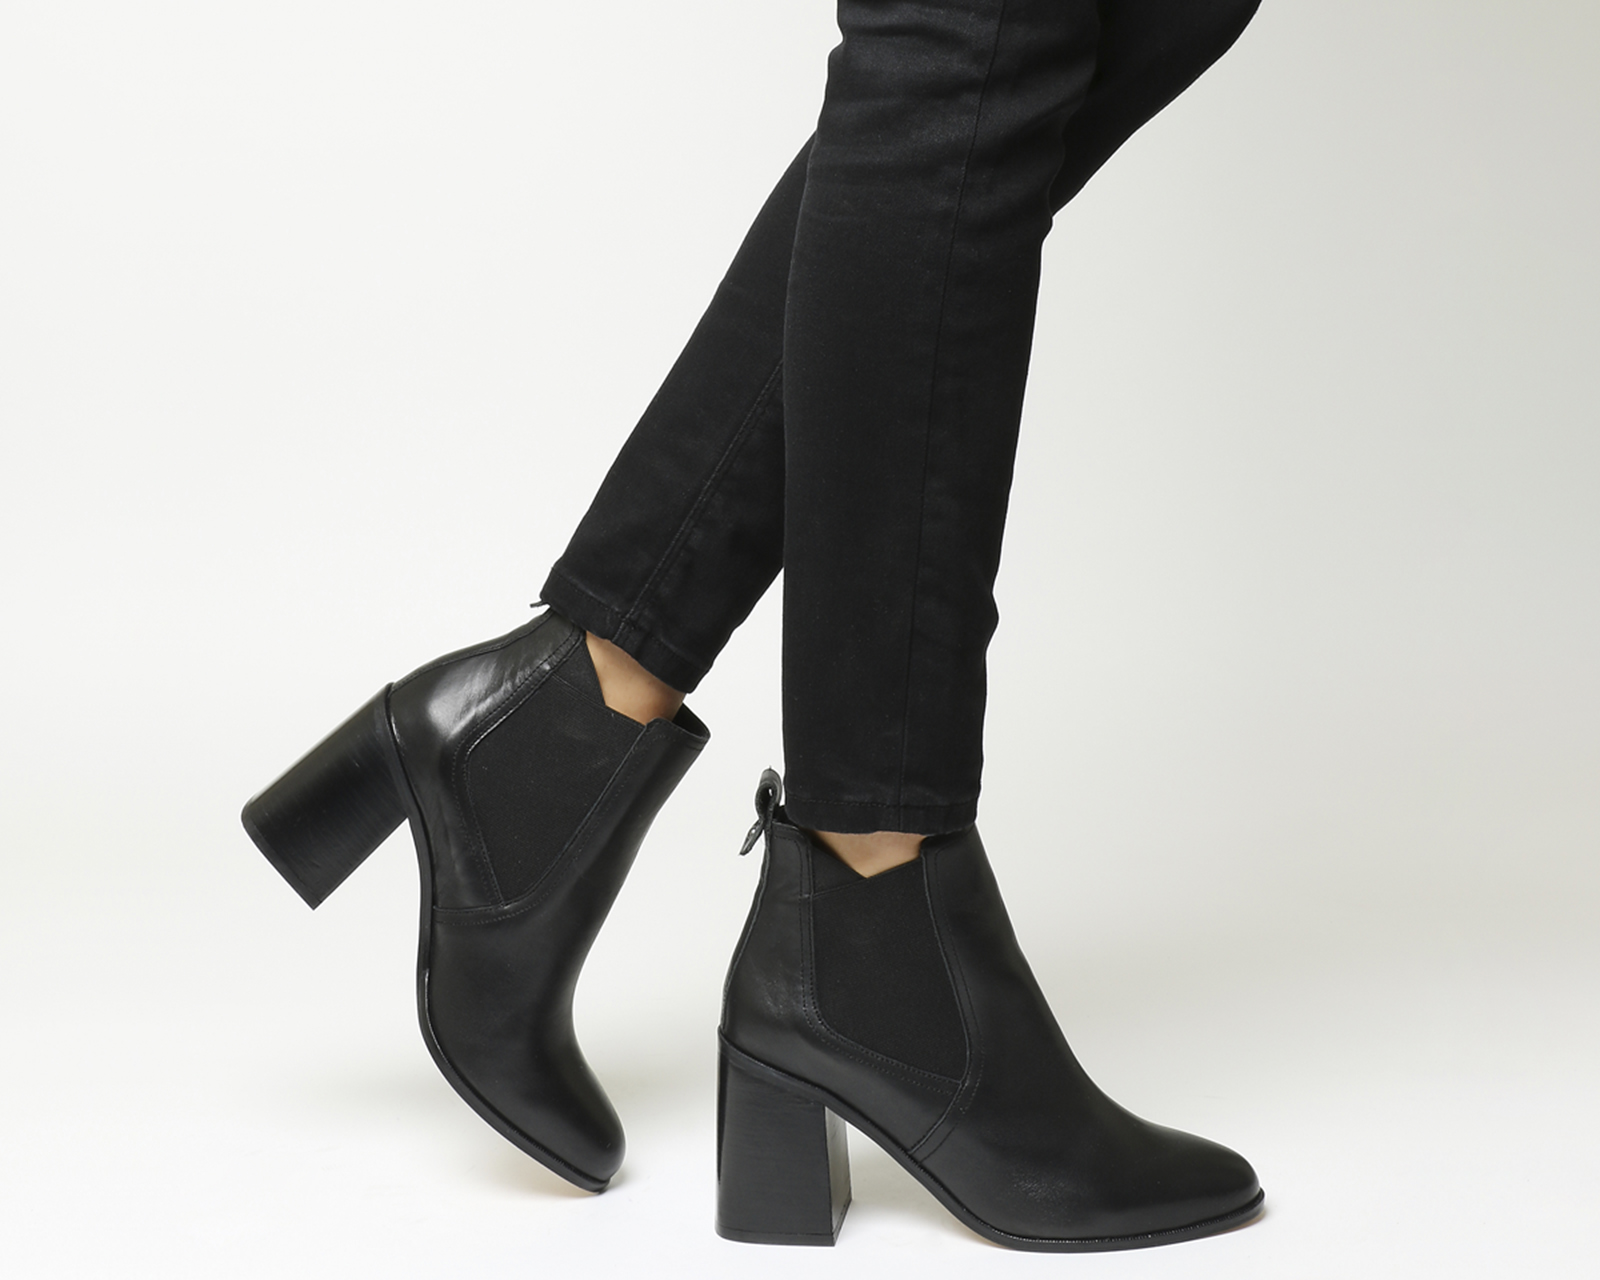 OFFICE Lavish Heeled Chelsea Boots Black Leather - Women's Ankle Boots